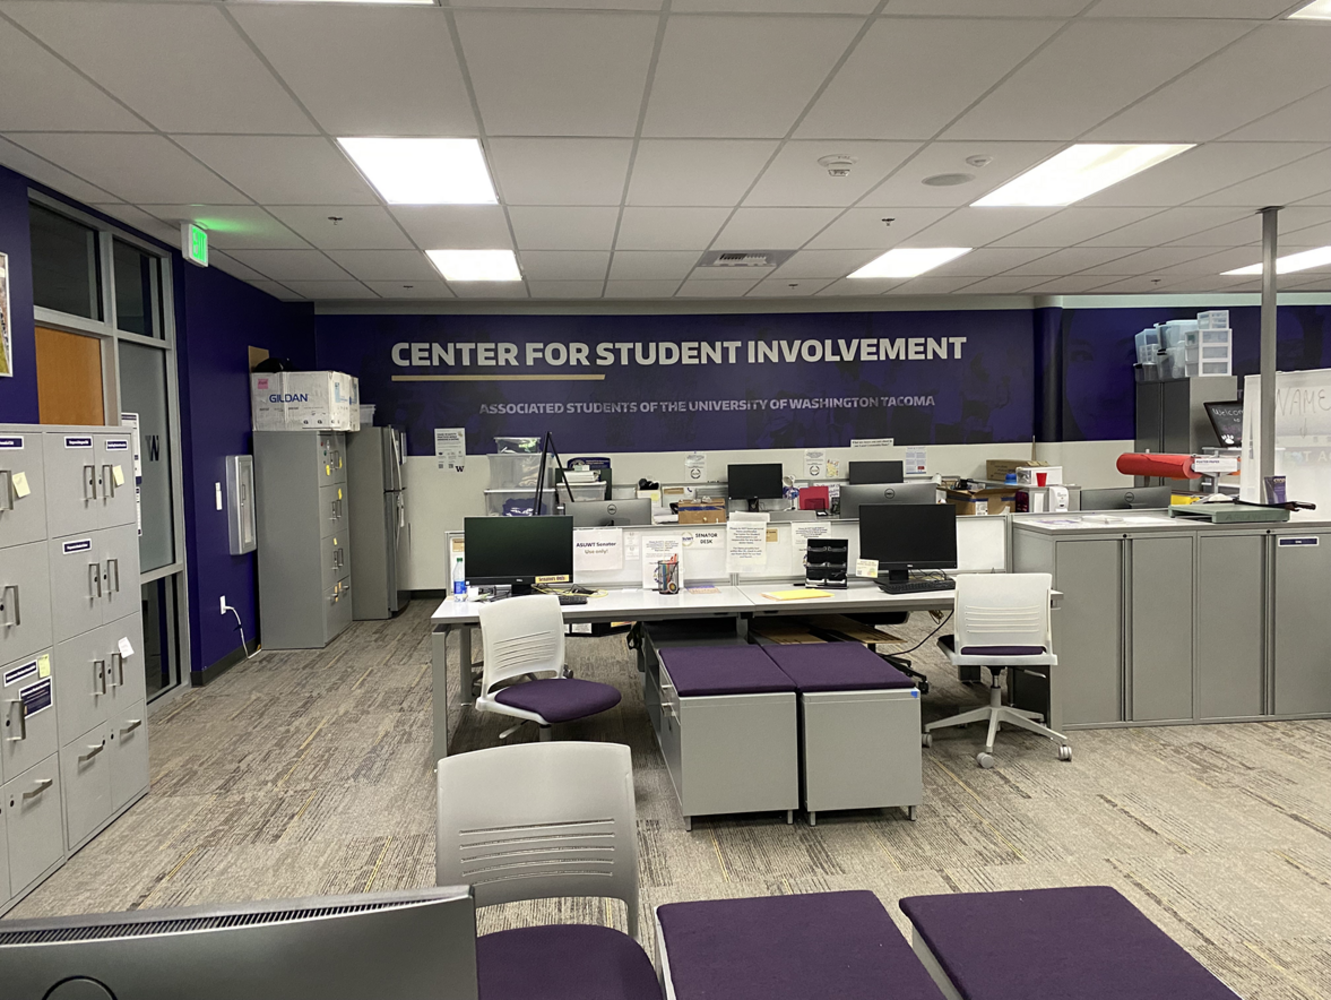 Center for student involvement office space